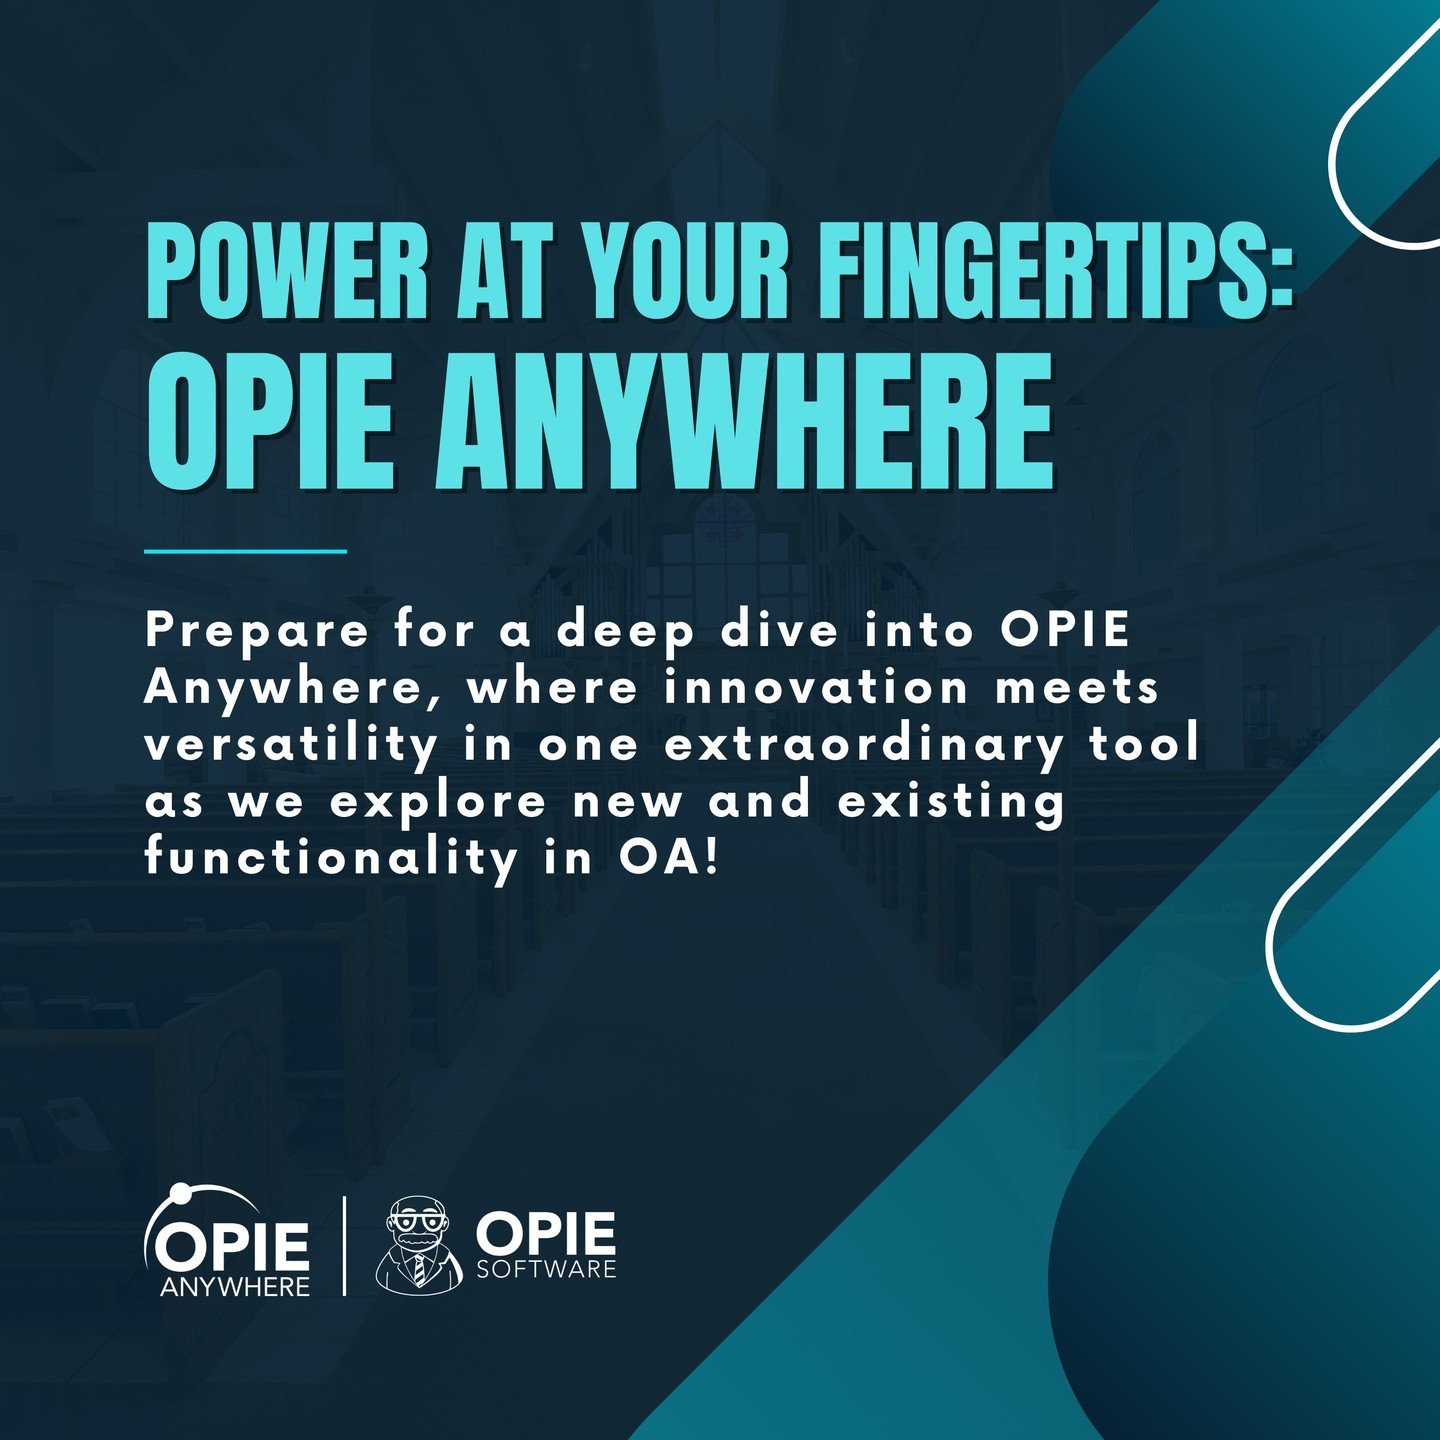 🚀 Power at your Fingertips with OPIE Anywhere! 🌟
This afternoon prepare for a deep dive into OPIE Anywhere where innovation meets versatility in one extraordinary tool! 💫
💡 Explore patient notes, effortlessly edit code selections, and seamlessly 